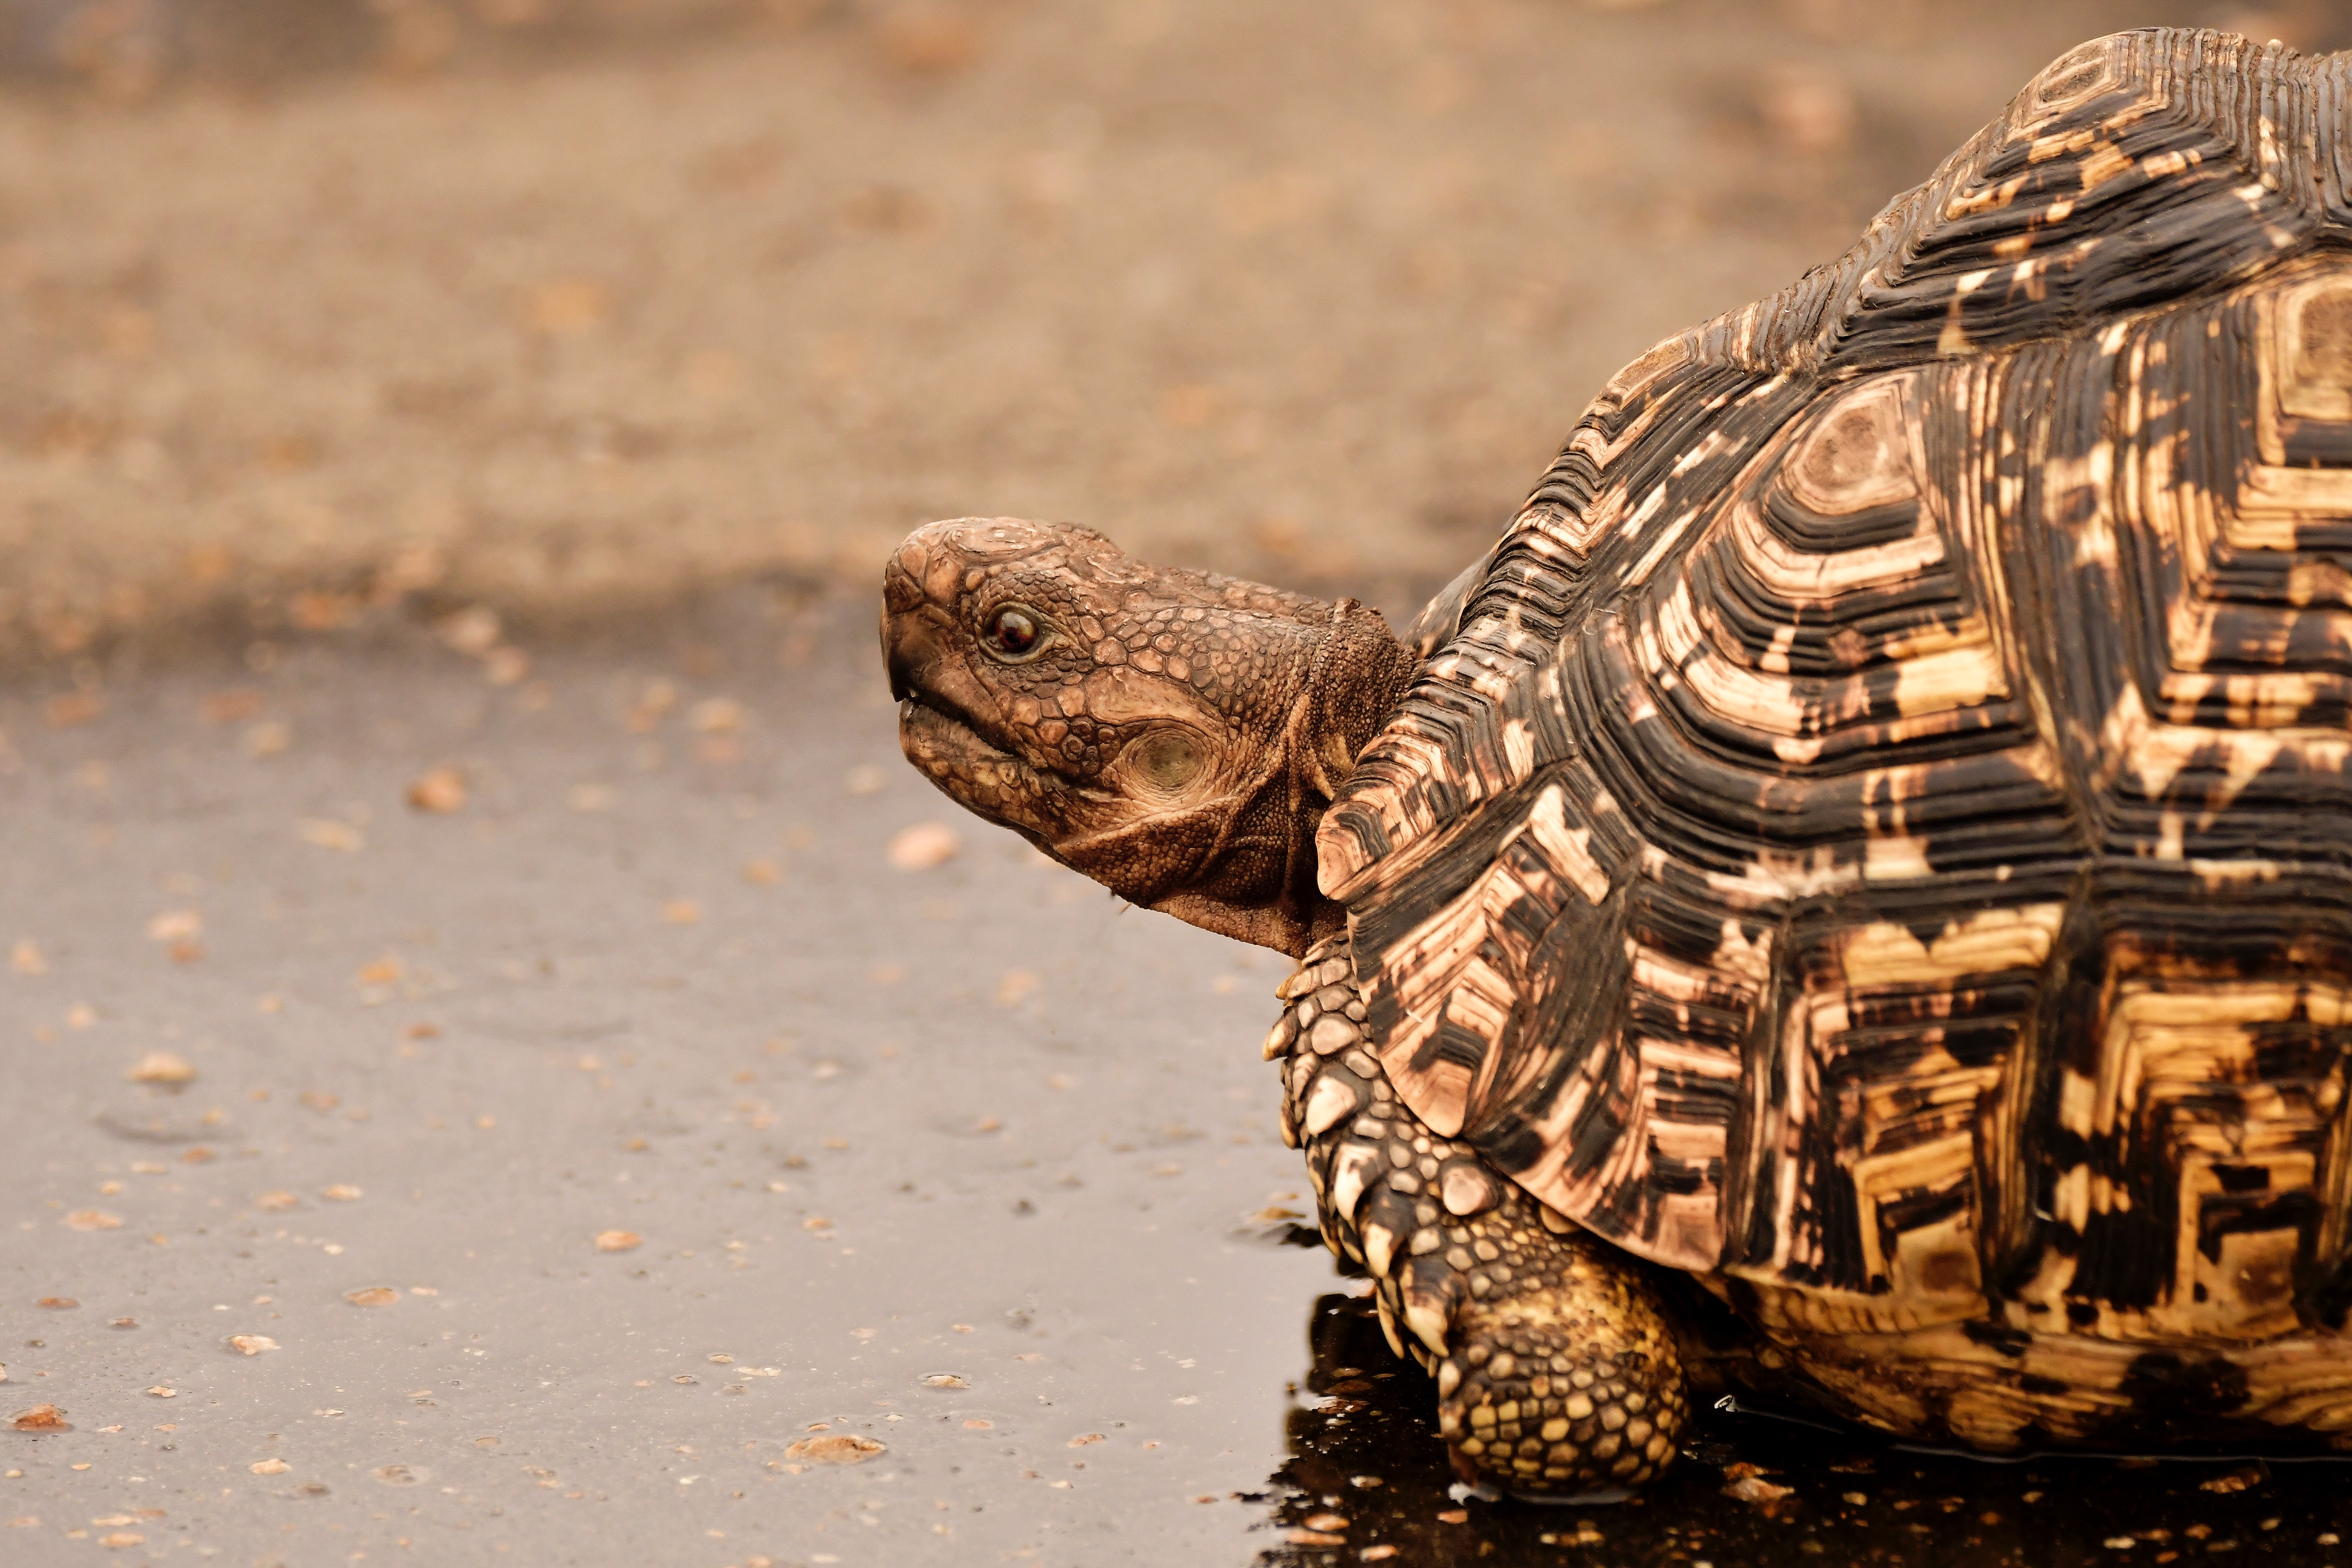 Brown tortoise on wet surface photo